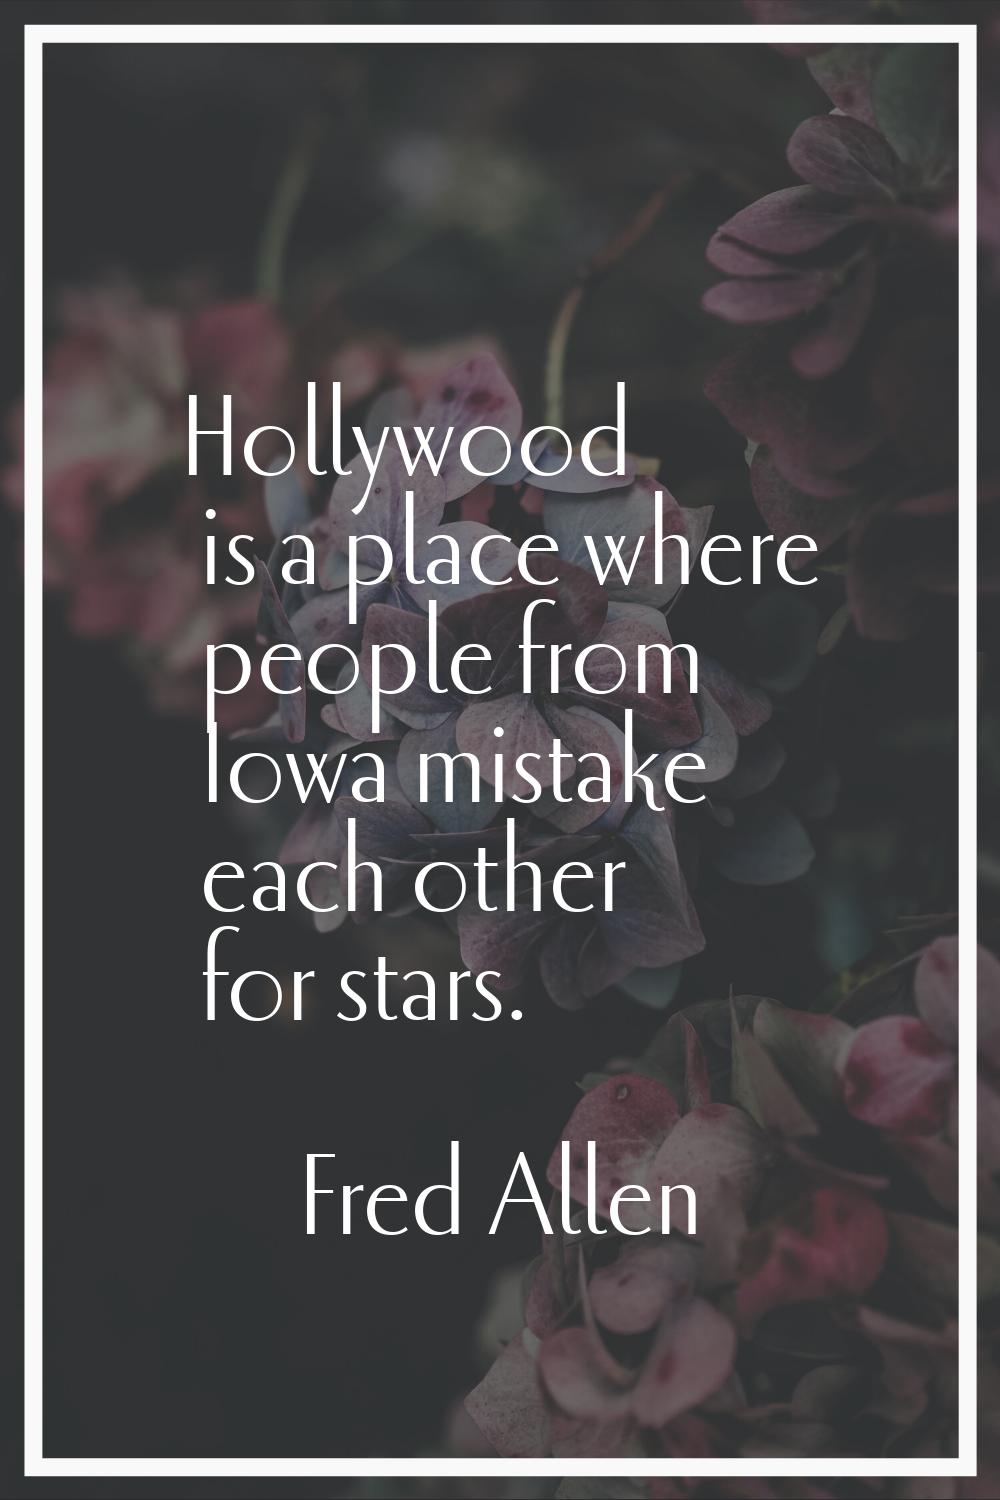 Hollywood is a place where people from Iowa mistake each other for stars.